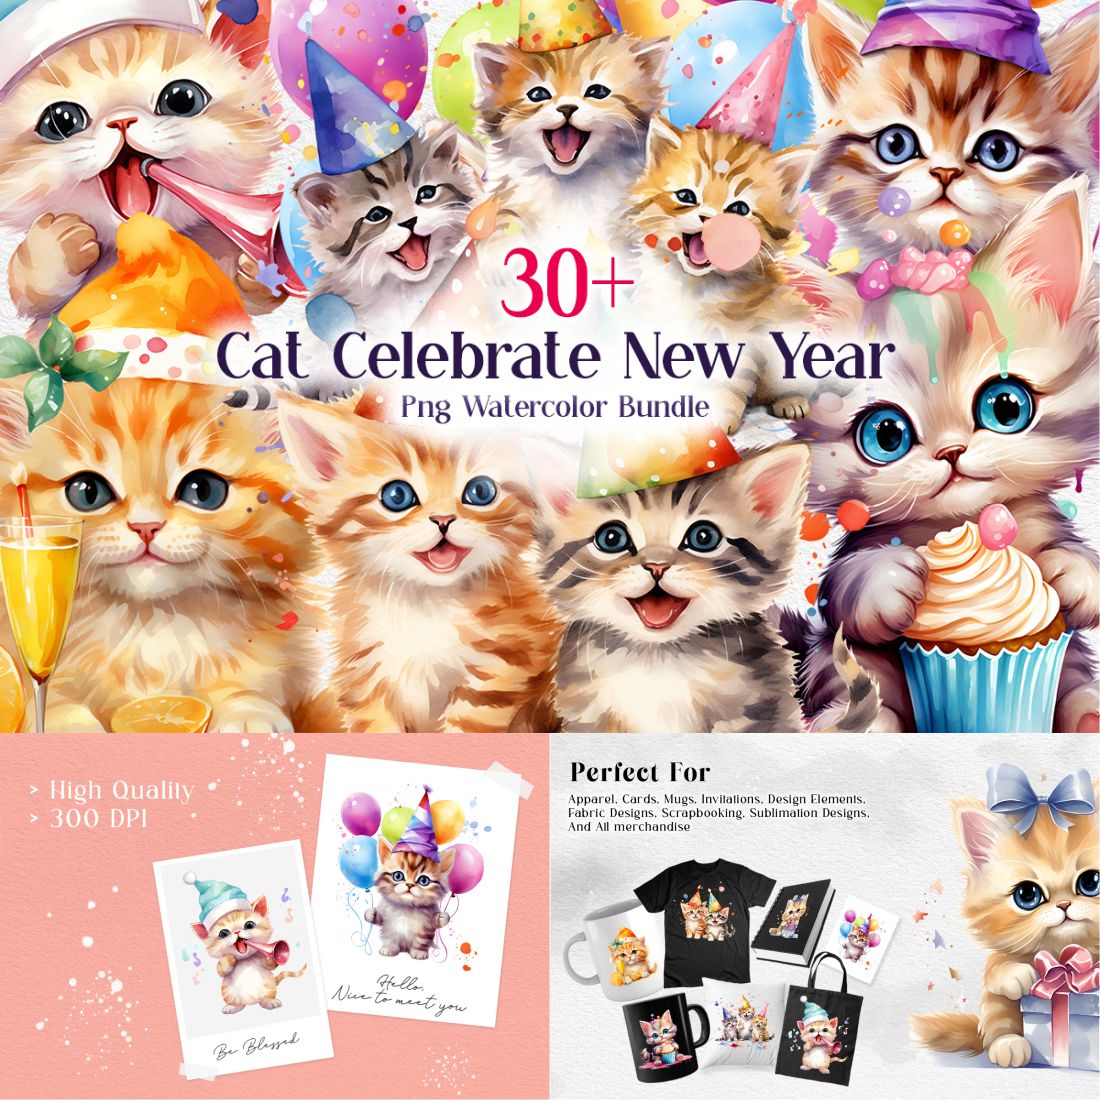 Cat Celebration New Year PNG Watercolor Bundle cover image.